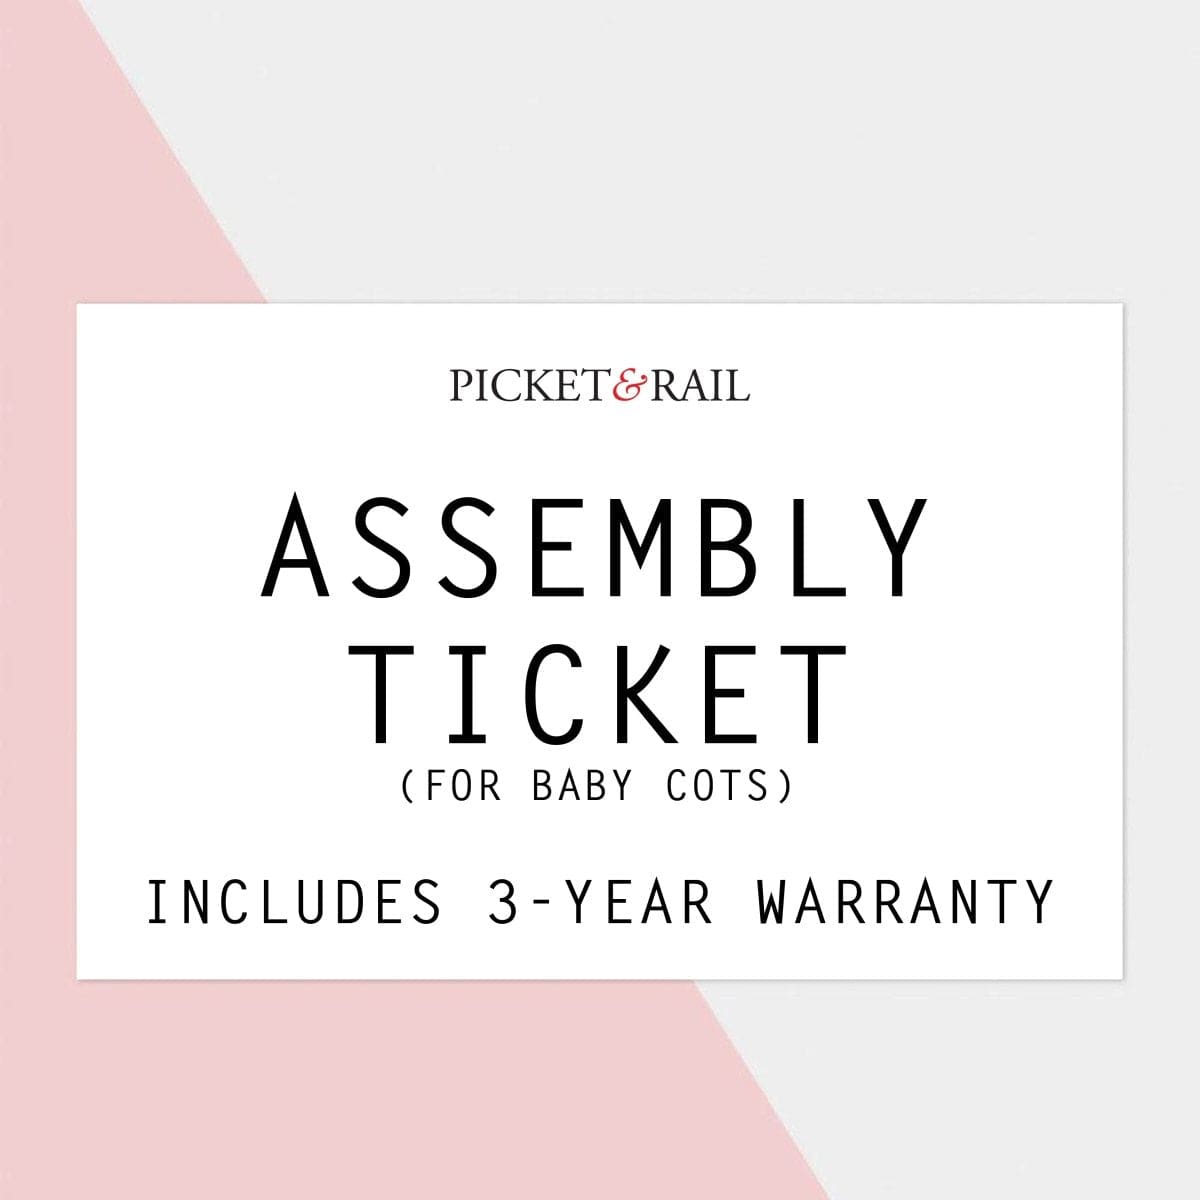 $30 Cot Assembly Ticket picket and rail